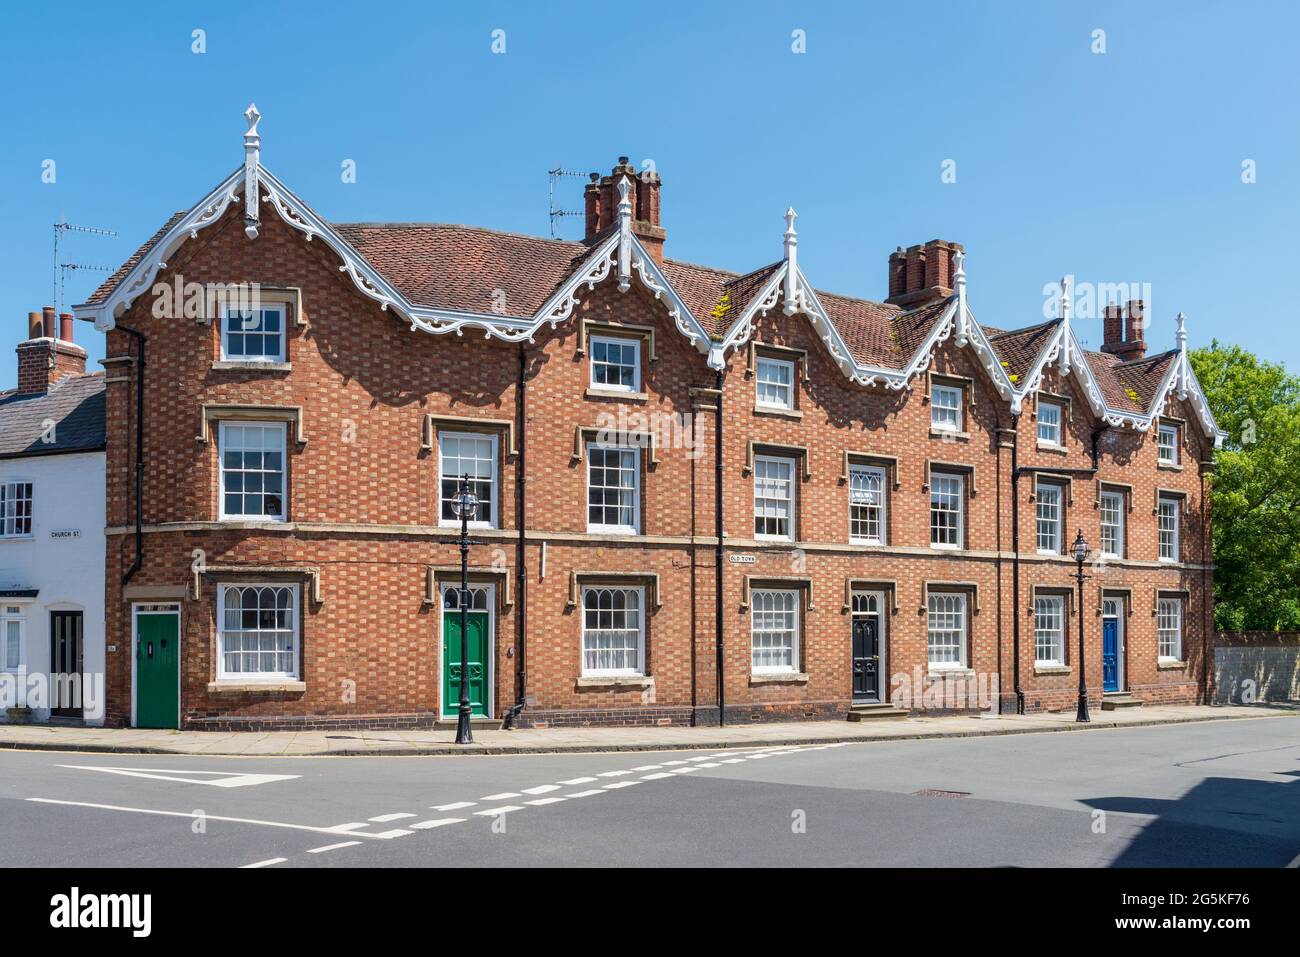 Row of townhouses with ornate brickwork in Old Town, Stratford-upon-Avon, Warwickshire Stock Photo